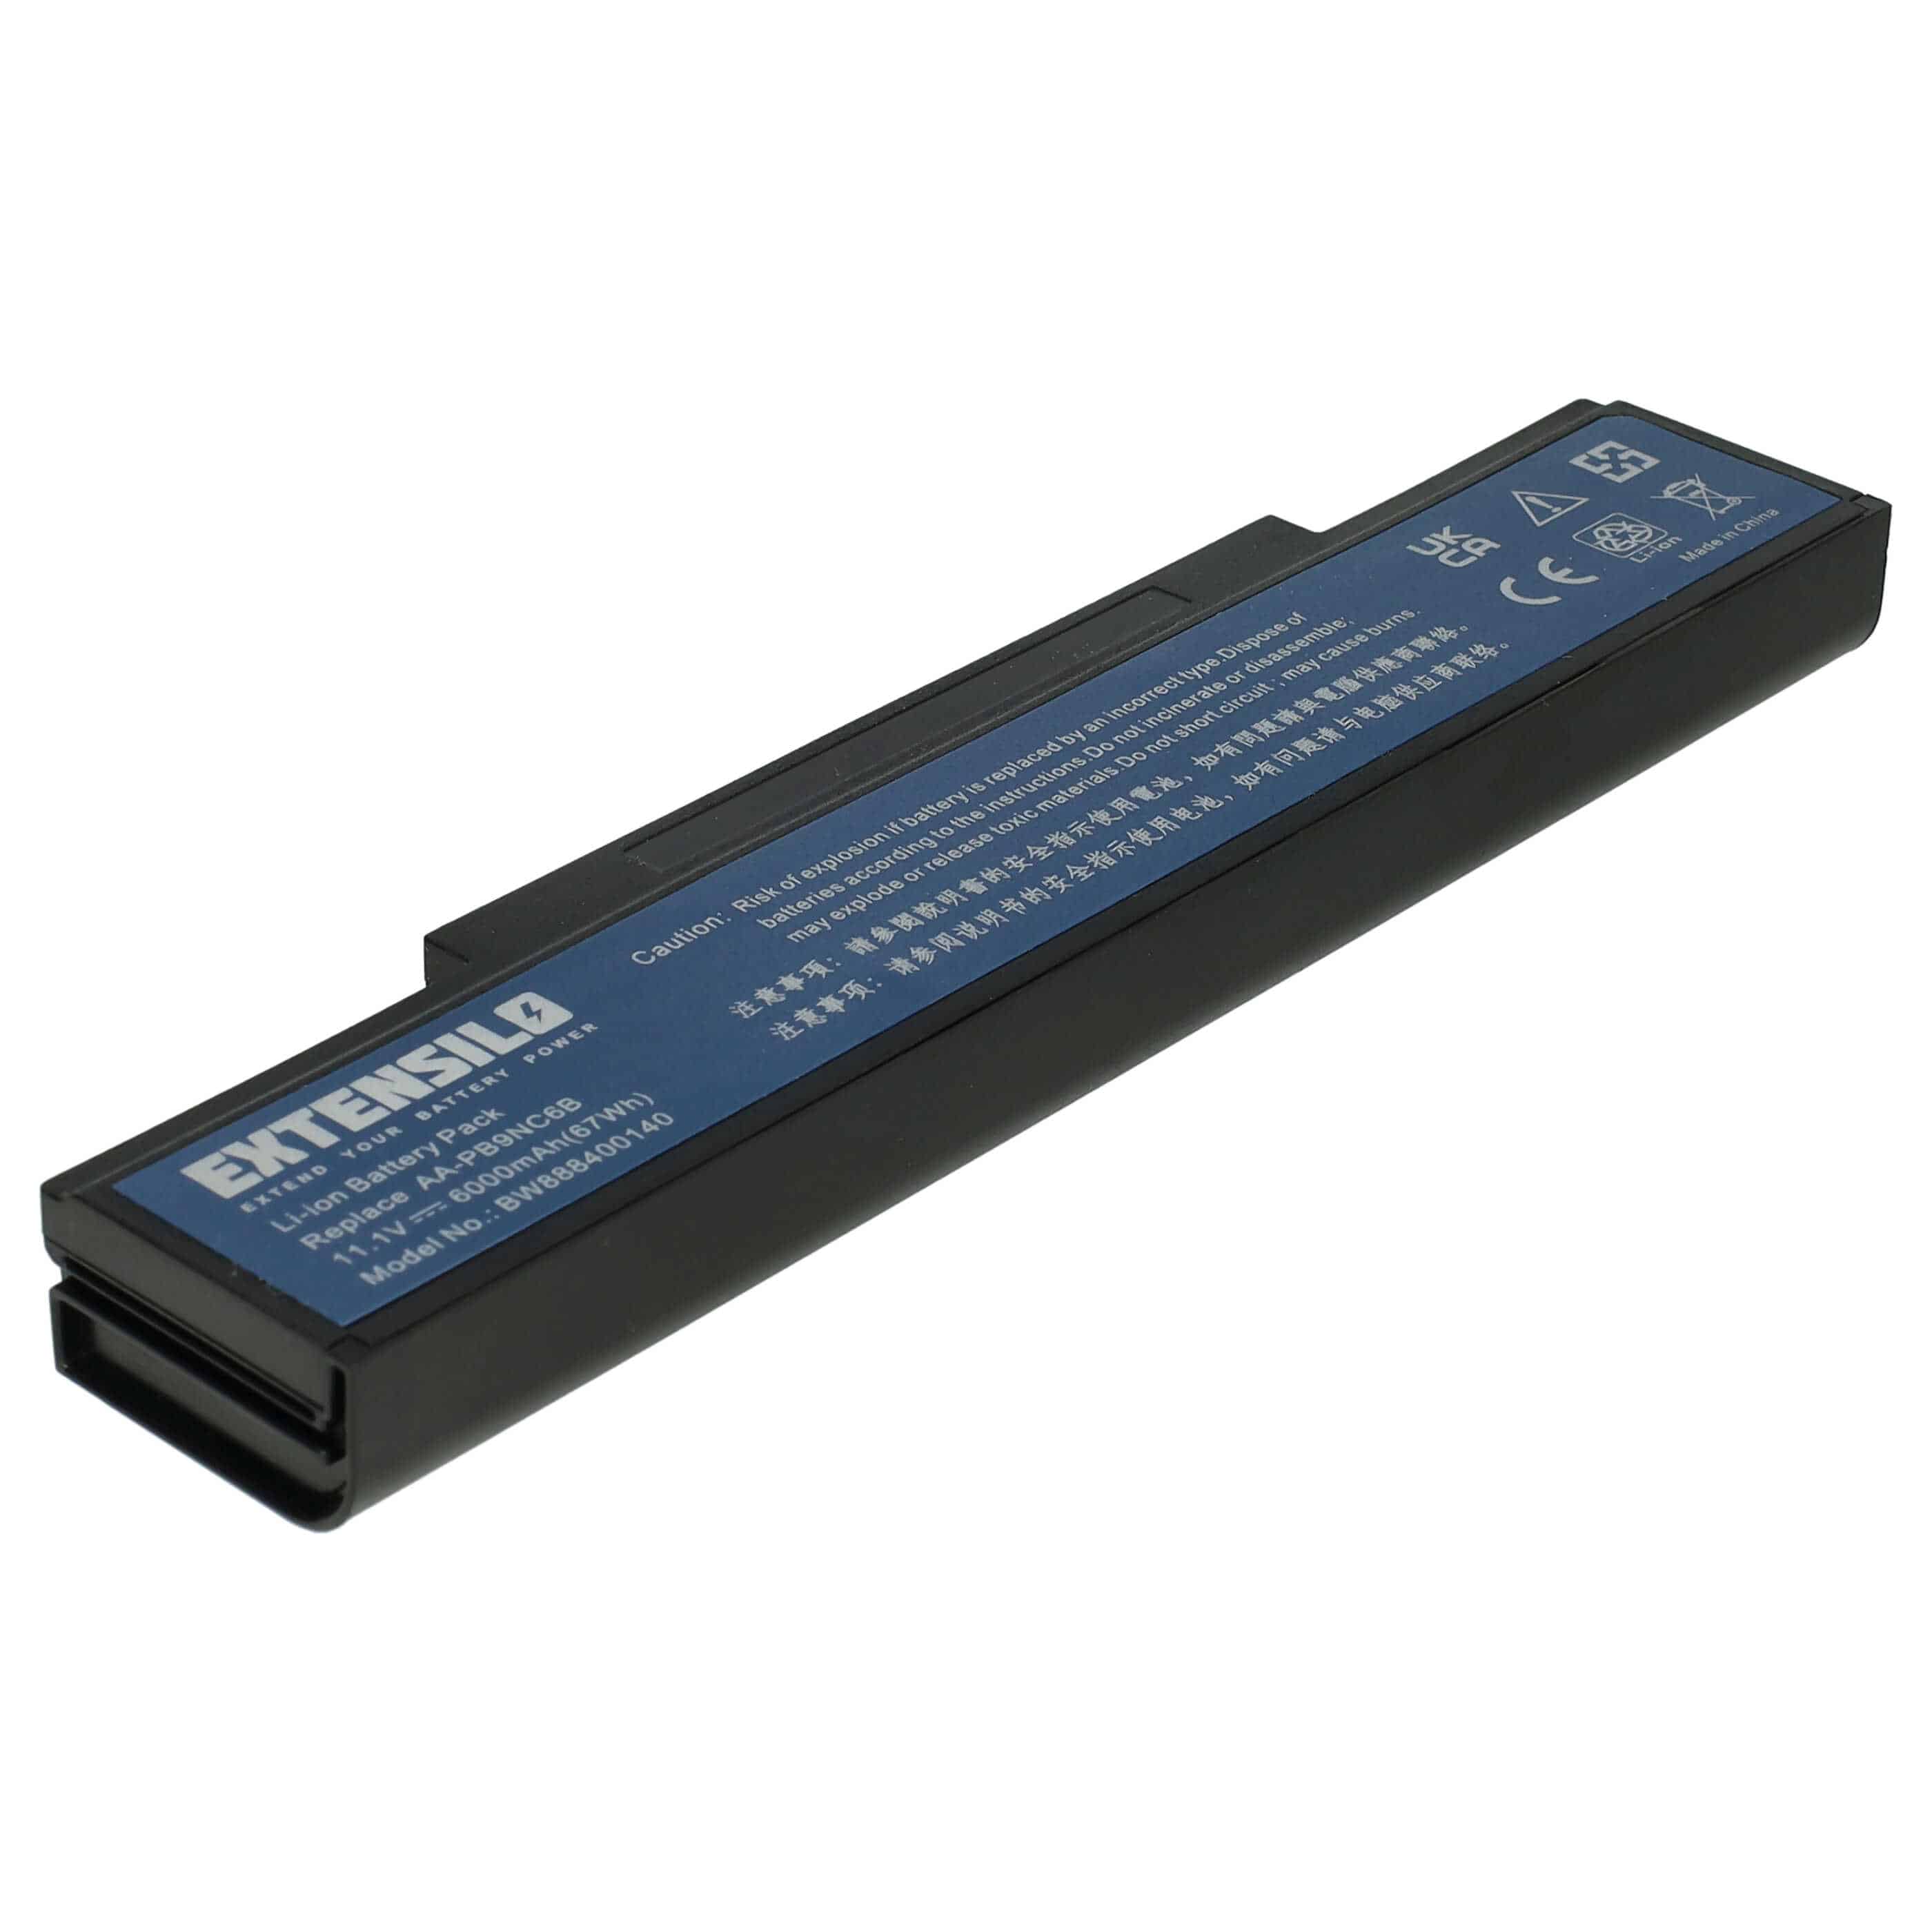 Notebook Battery Replacement for Samsung AA-PB9NC5B, AA-PB9MC6B, AA-PB9MC6W, AA-PB9MC6S - 6000mAh 11.1V Li-Ion